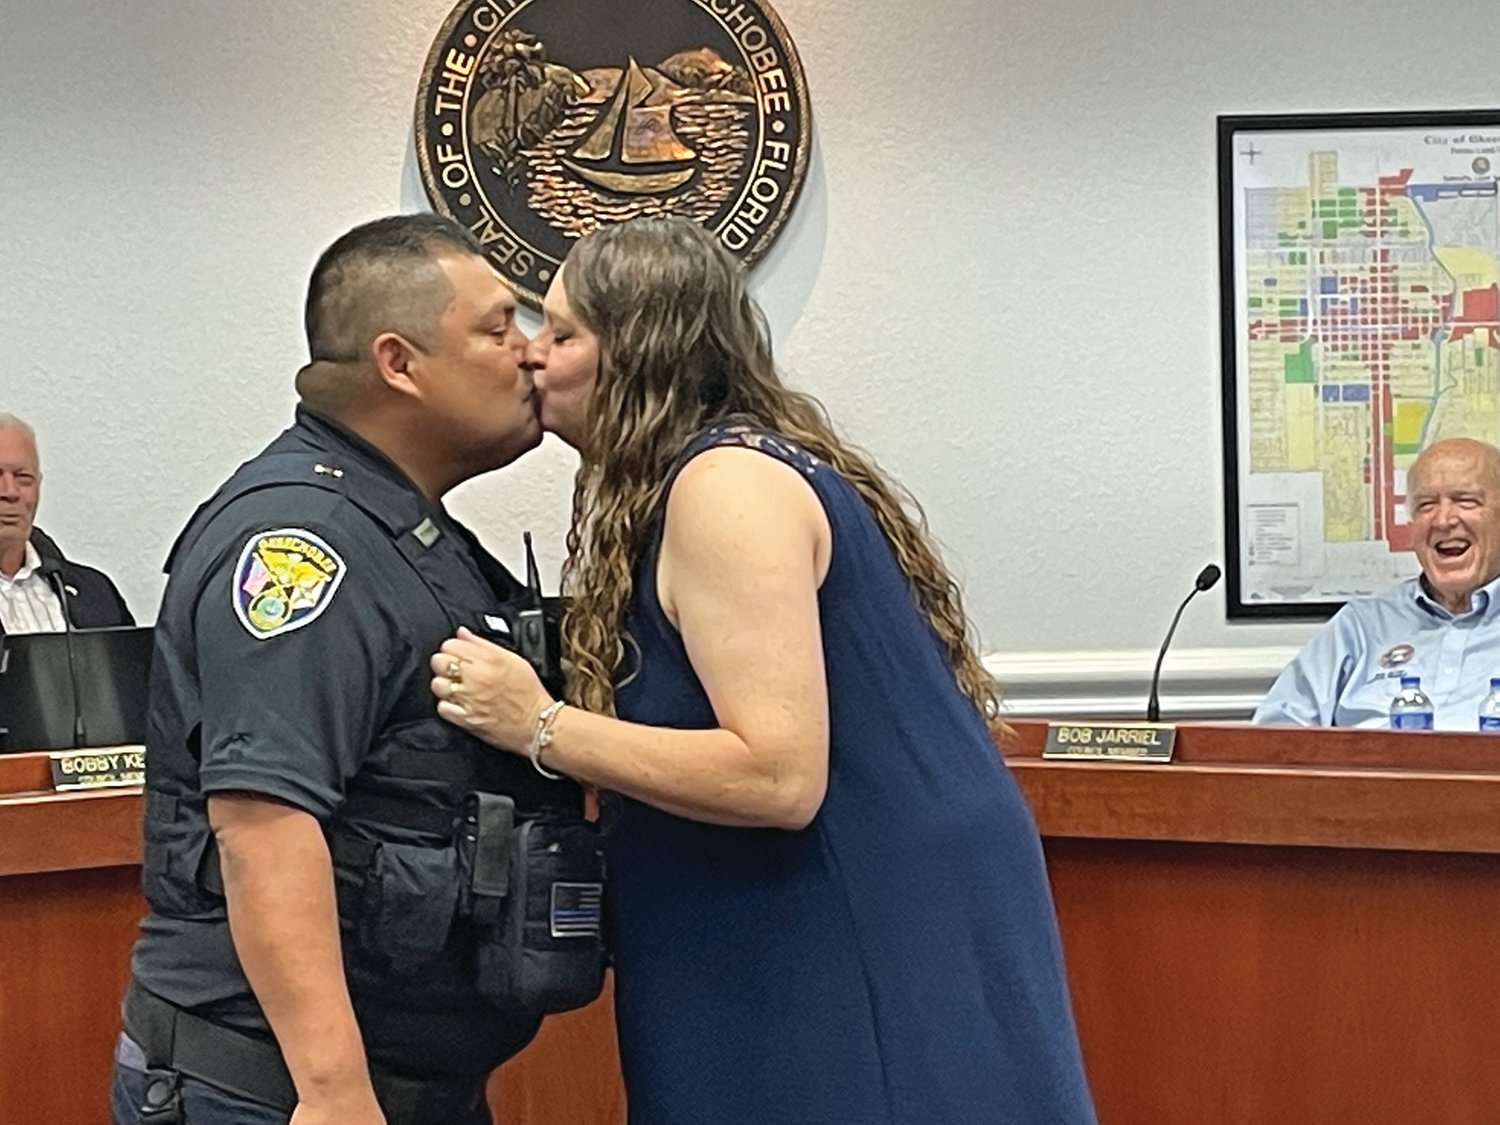 Belen Reyna, who recently made Lieutenant was pinned by his wife Sursha.